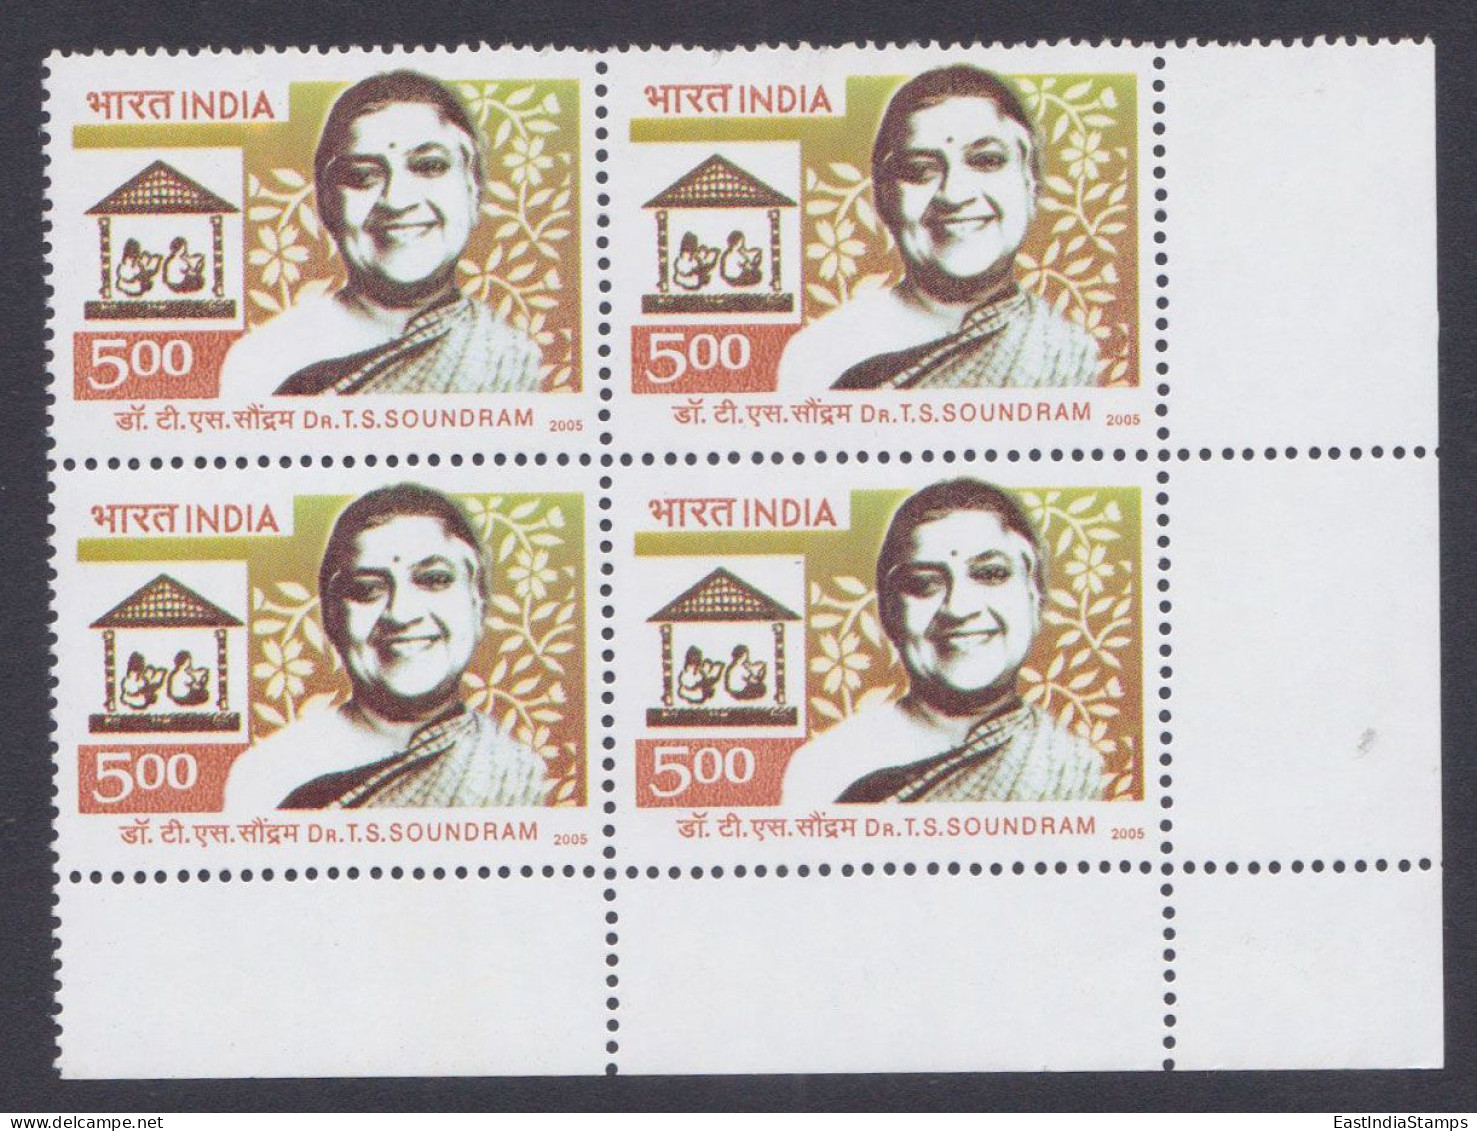 Inde India 2005 MNH Dr. T.S. Soundram, Indian Physician, Social Reformer, Politician, Block - Unused Stamps